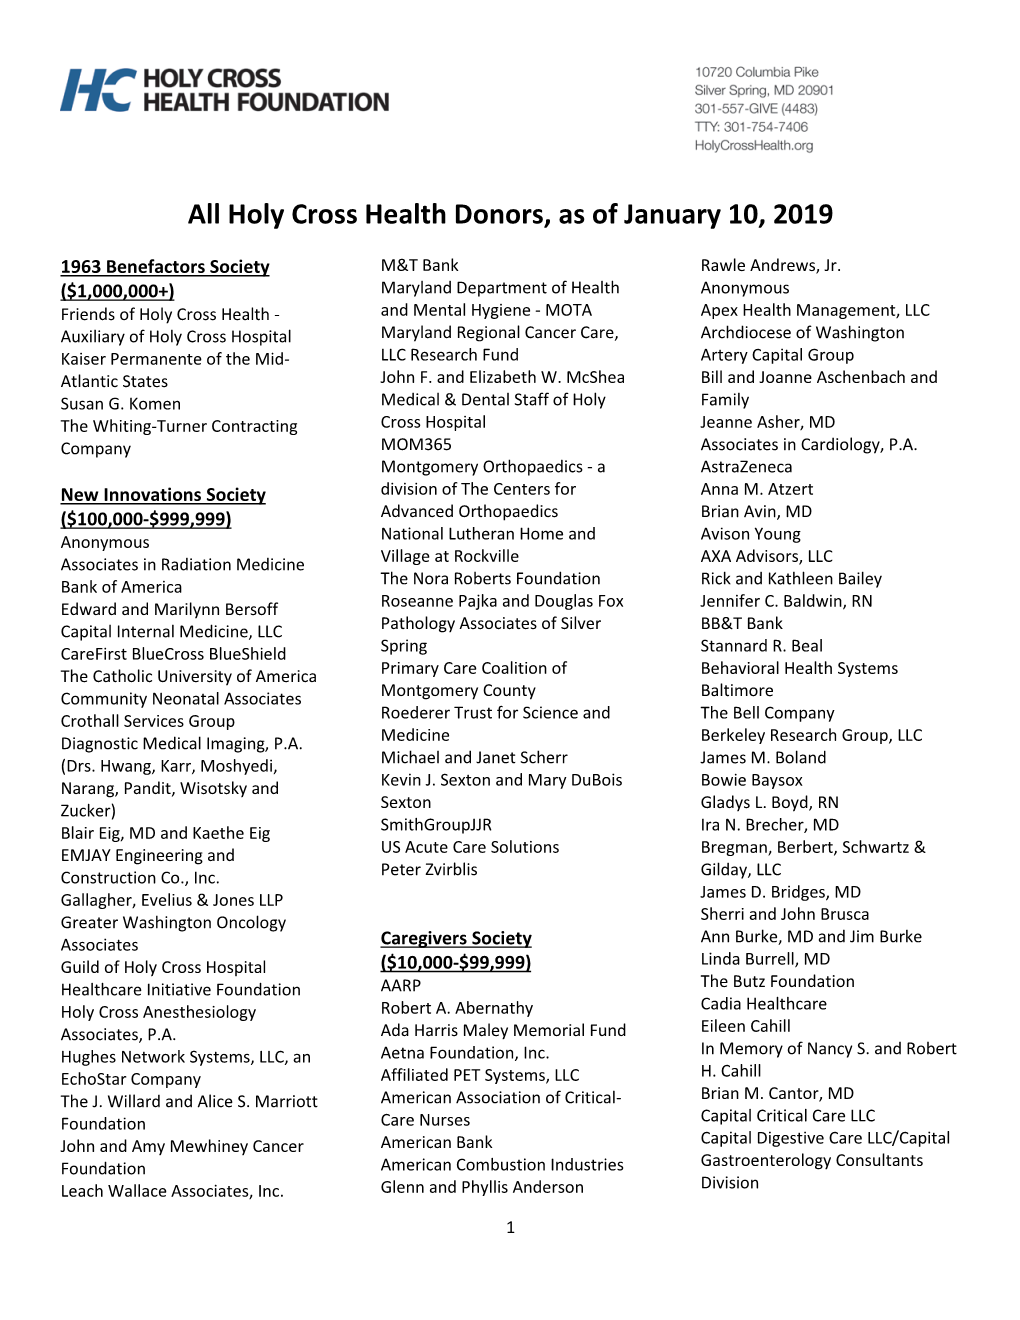 All Holy Cross Health Donors, As of January 10, 2019